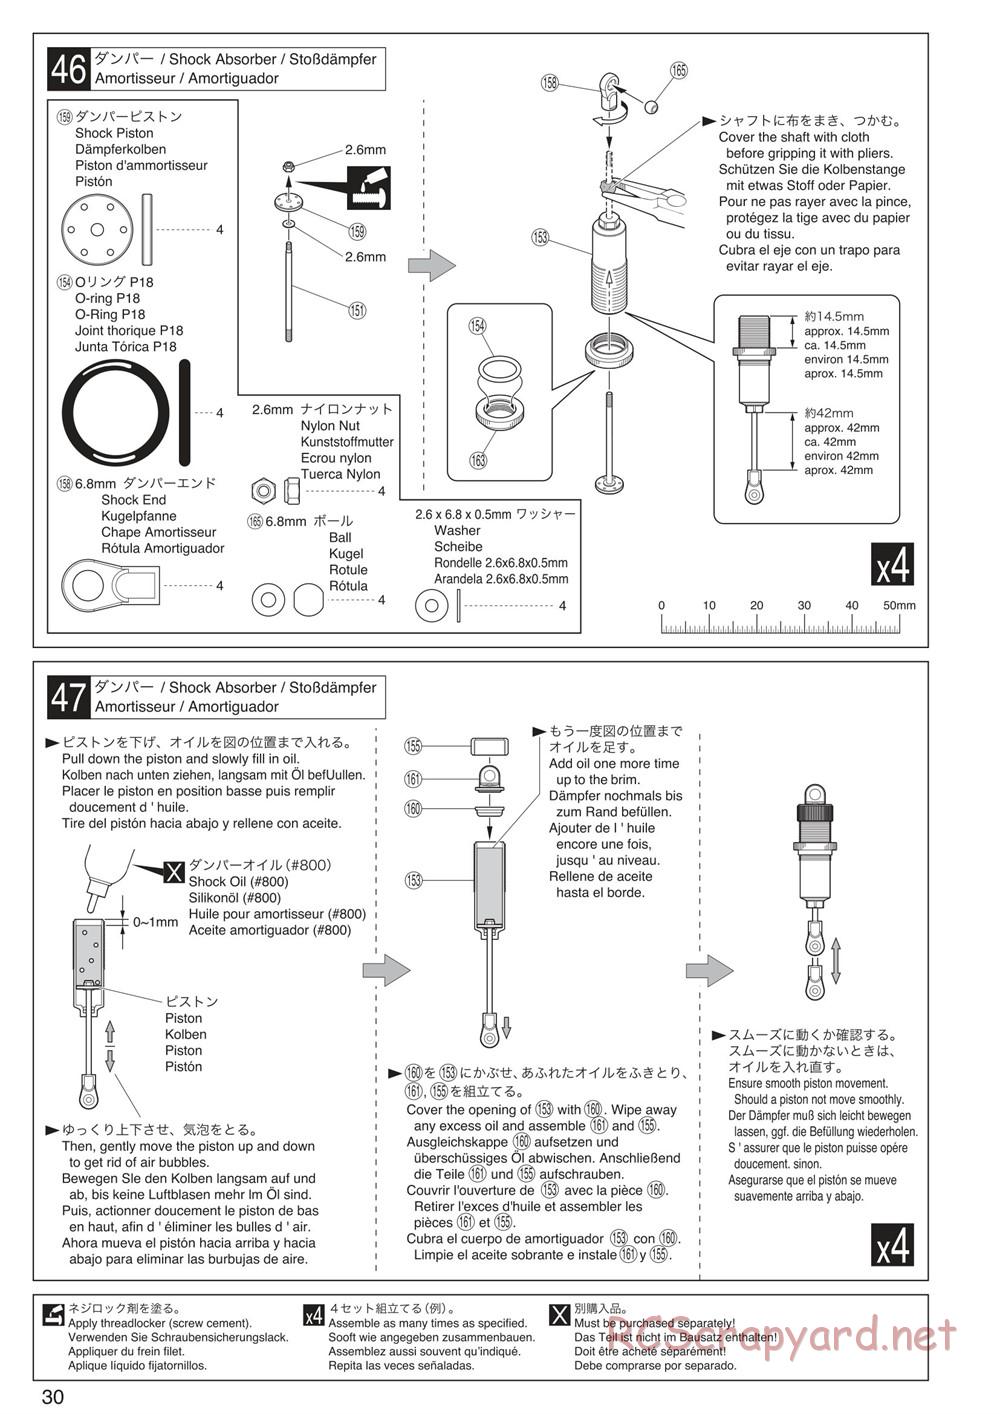 Kyosho - Inferno Neo ST 3.0 - Manual - Page 30